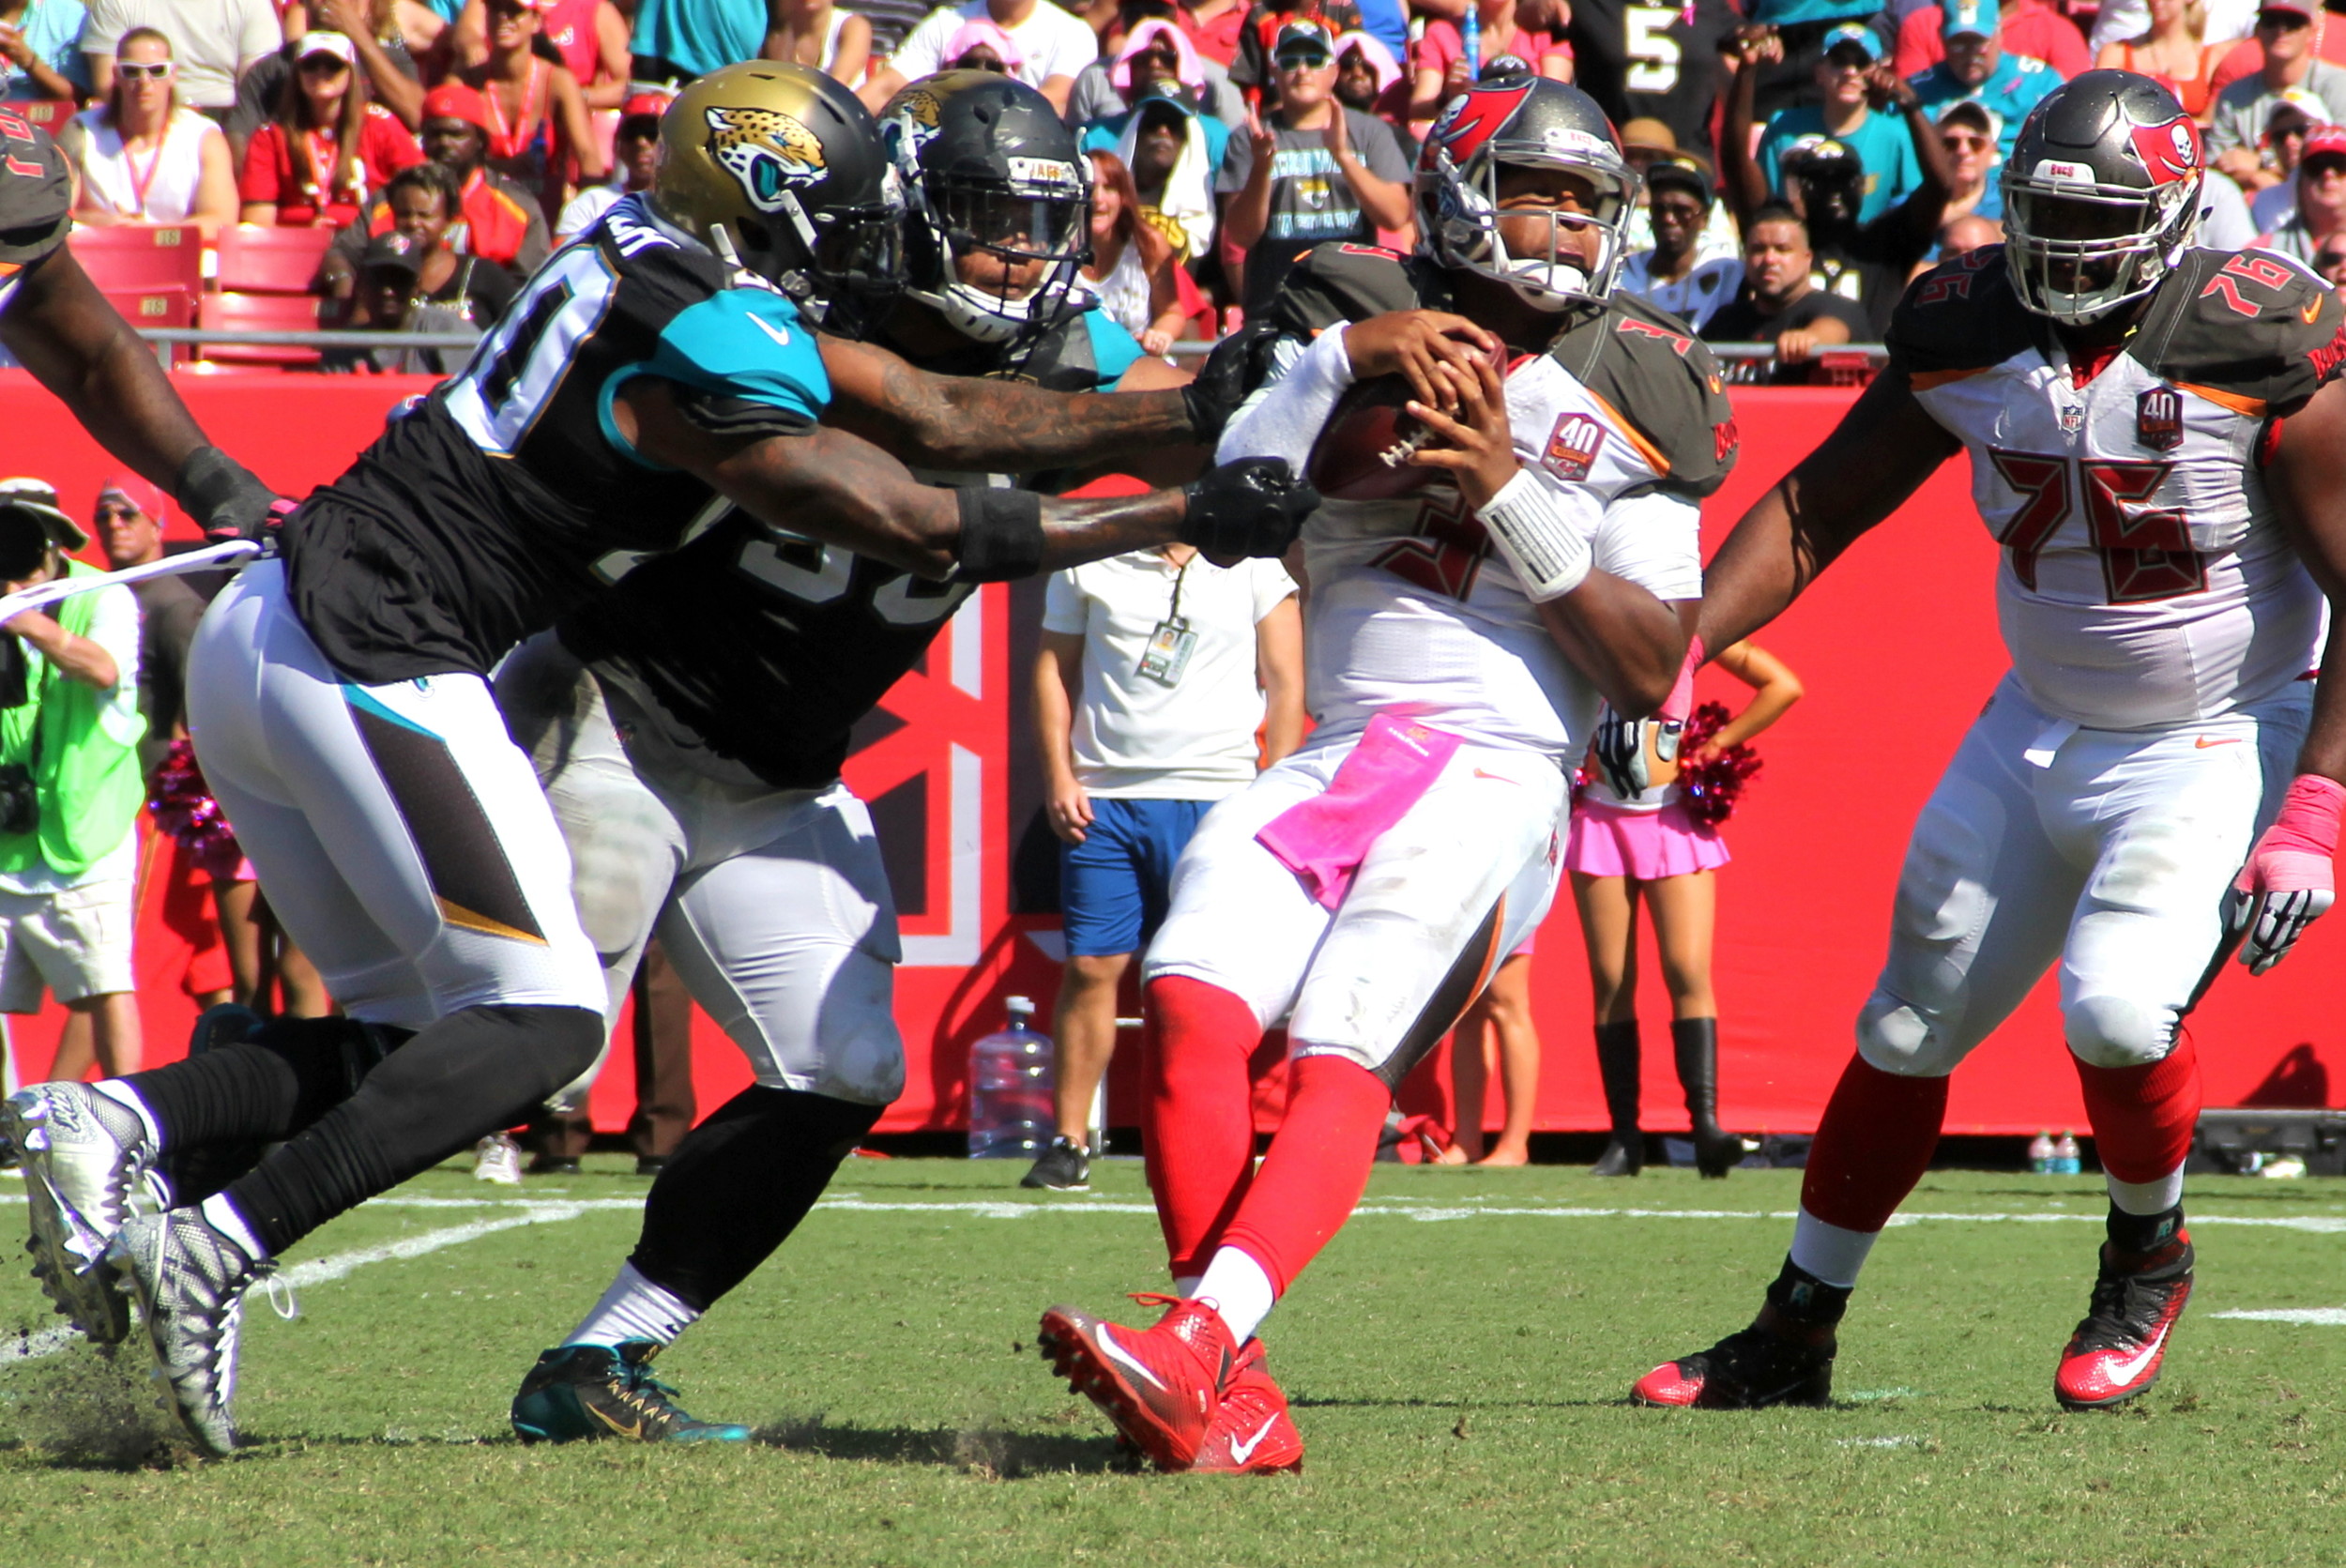 Bucs’ rookie QB Jameis Winston, who threw throwing four interceptions and lost a fumble in a 14-point loss to Carolina last week, managed the game well enough to win. The No. 1 overal